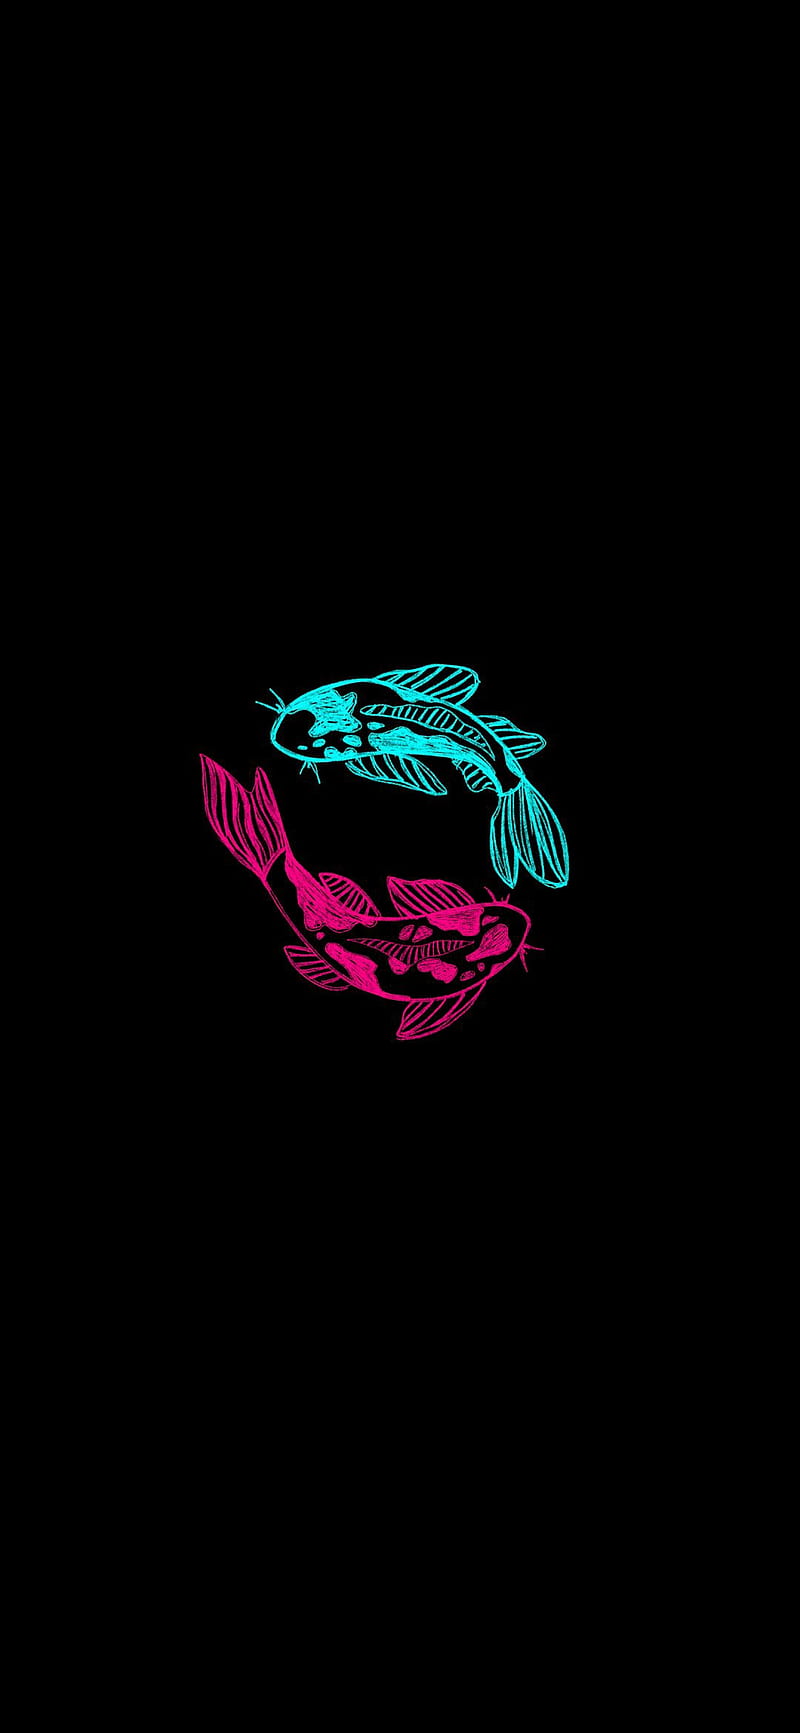 A neon pink and blue koi fish on a black background - Pisces